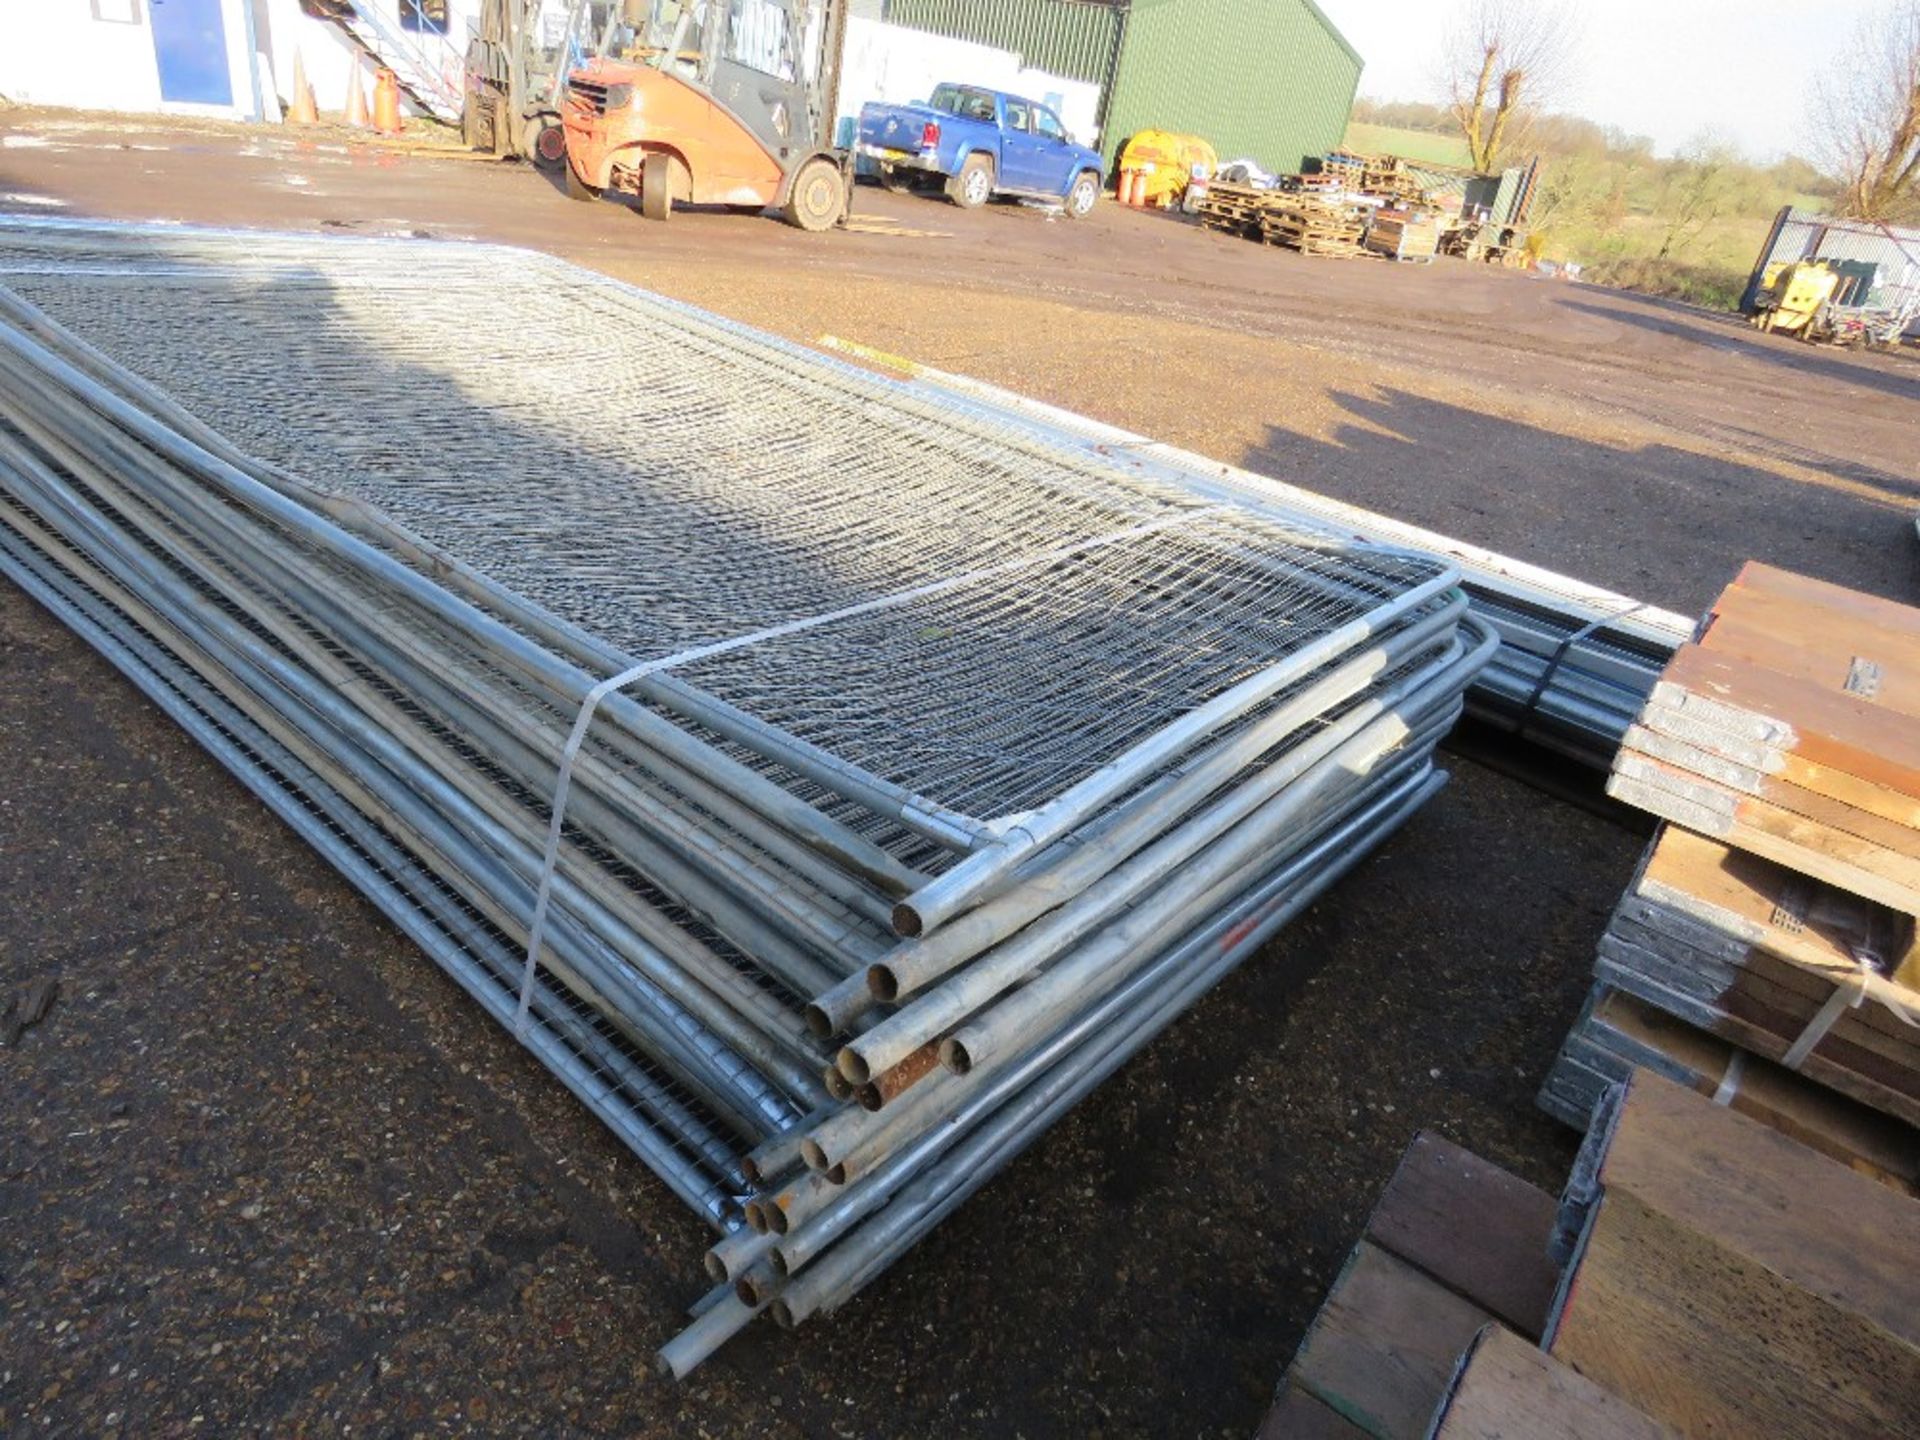 20 X HERAS TYPE TEMPORARY SITE PANELS This items is being item sold under AMS…no vat will be on - Image 3 of 3